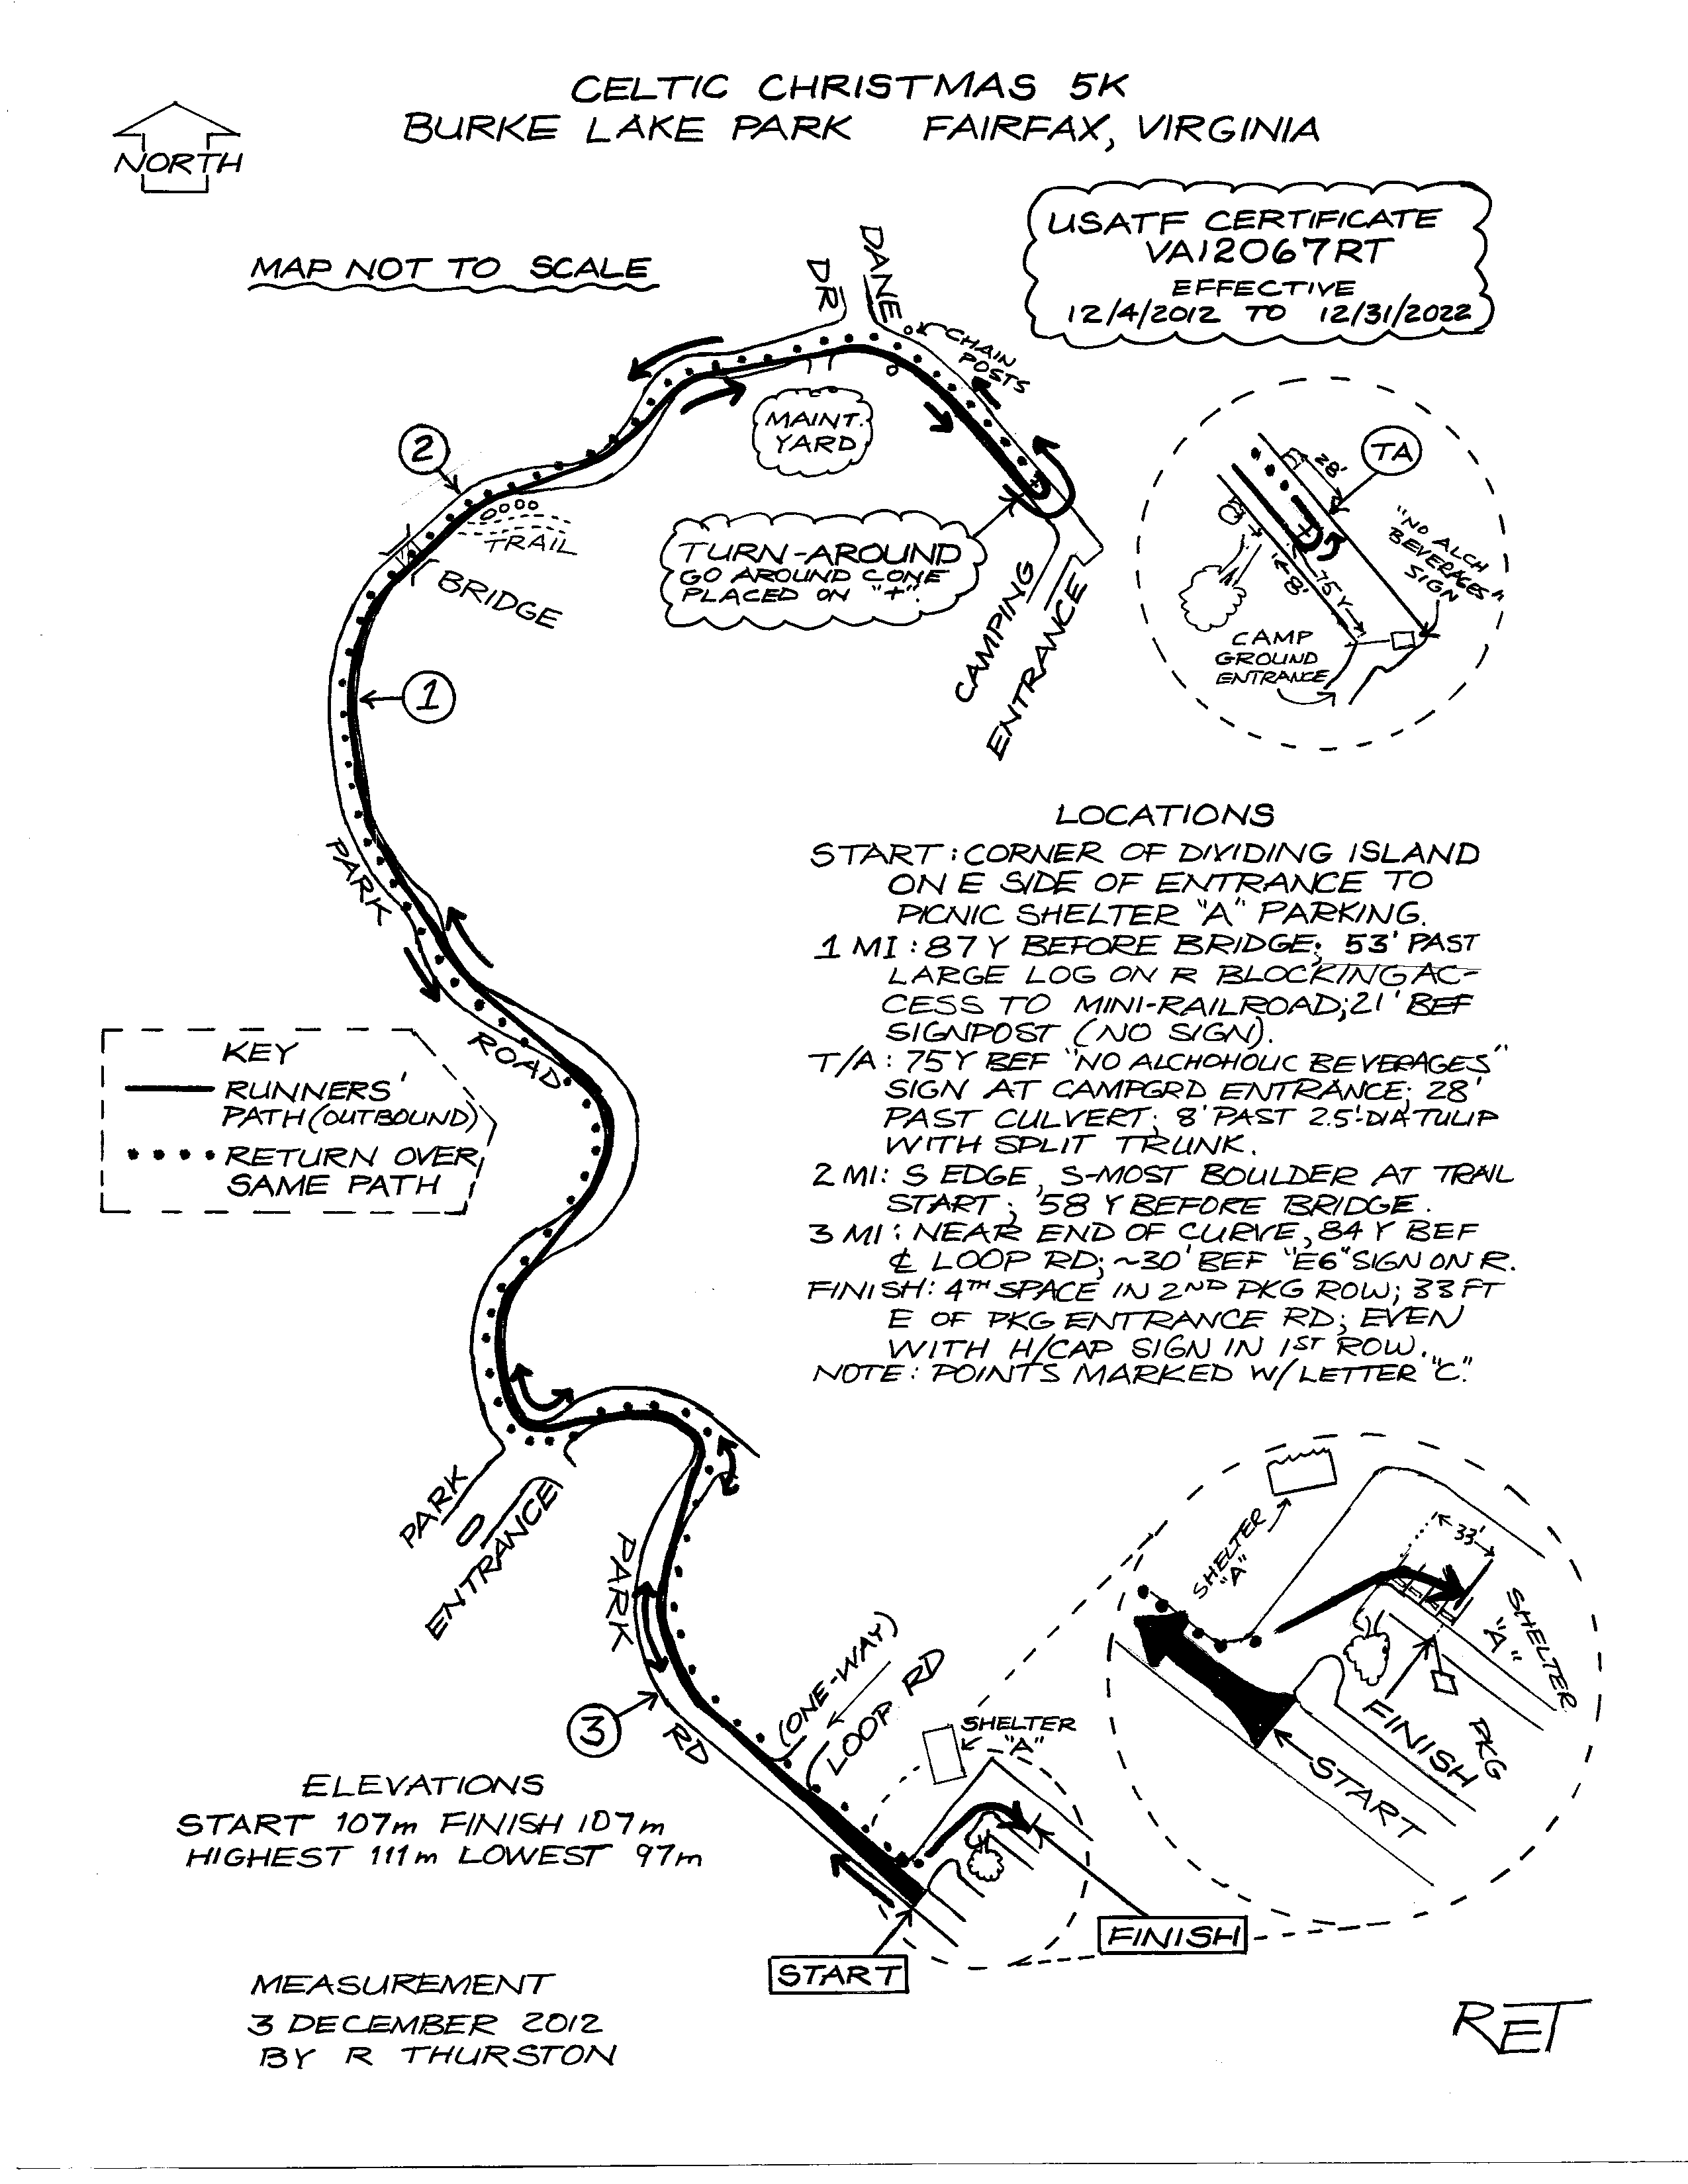 5k certified course map